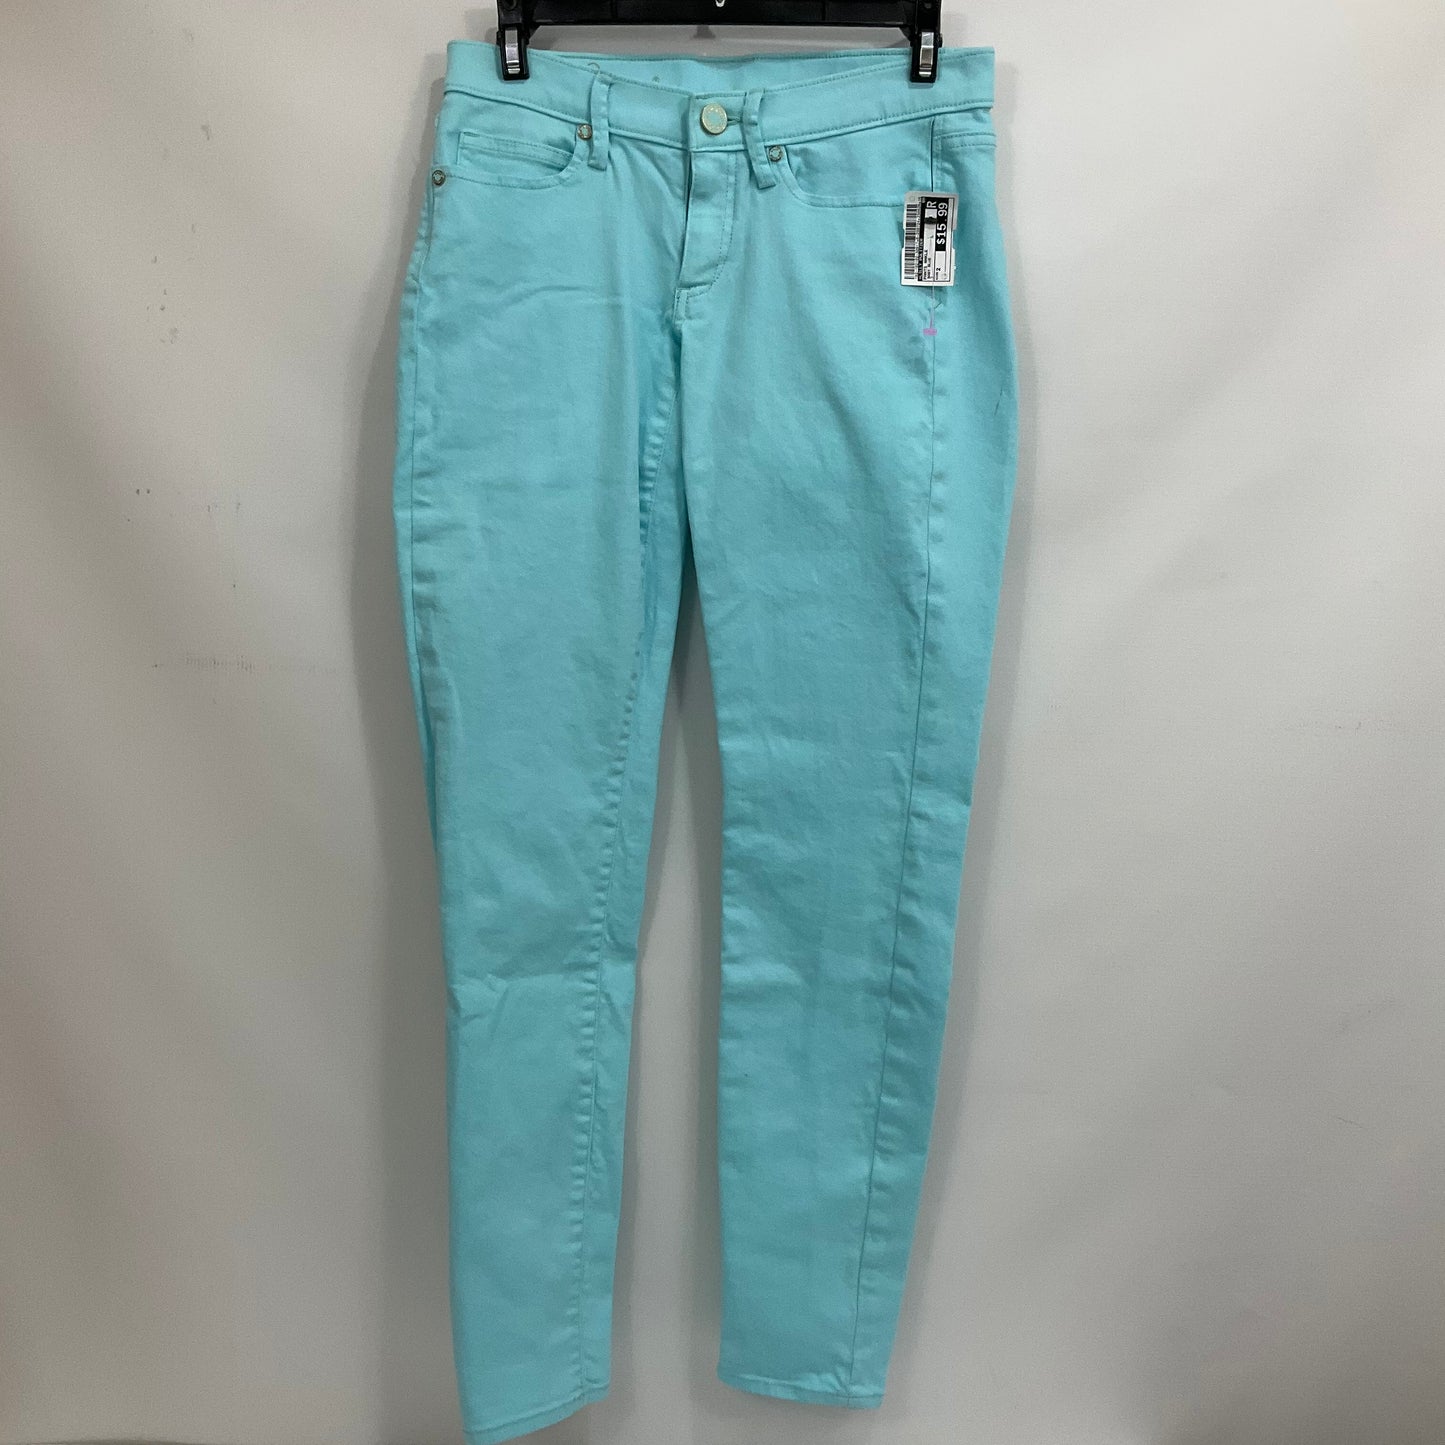 Pants Ankle By Lilly Pulitzer  Size: 2